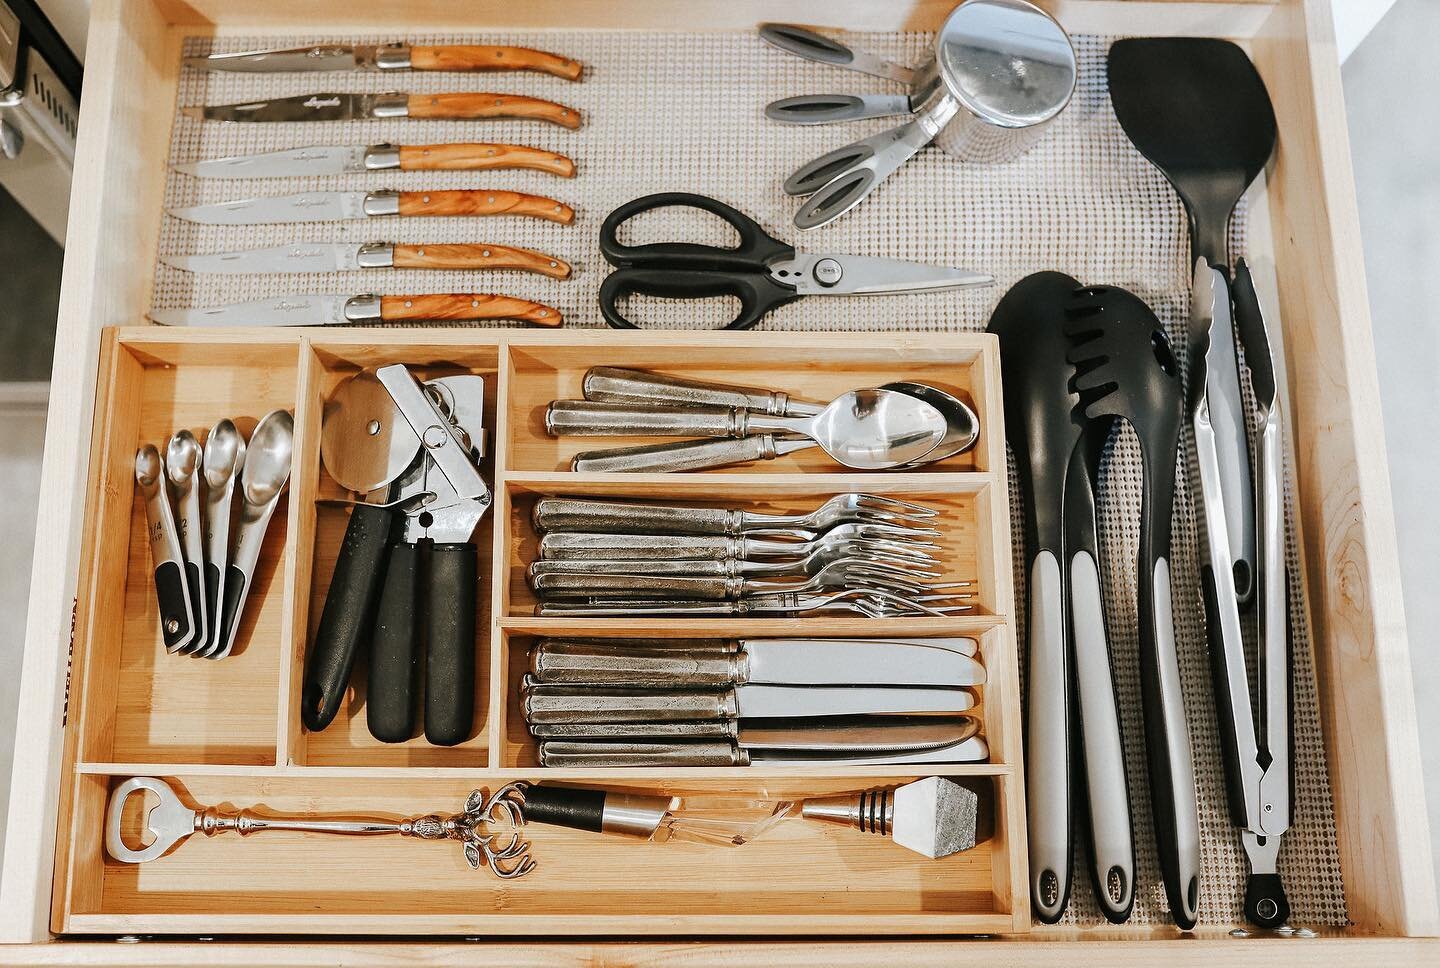 It&rsquo;s the perfect time to organize your every day cutlery drawer. ✨
I love using these bamboo organizers to create designated zones for each utensil 😍 
.
.
@thecontainerstore #thecontainerstore #categories #cutlery #clean #simple #organization